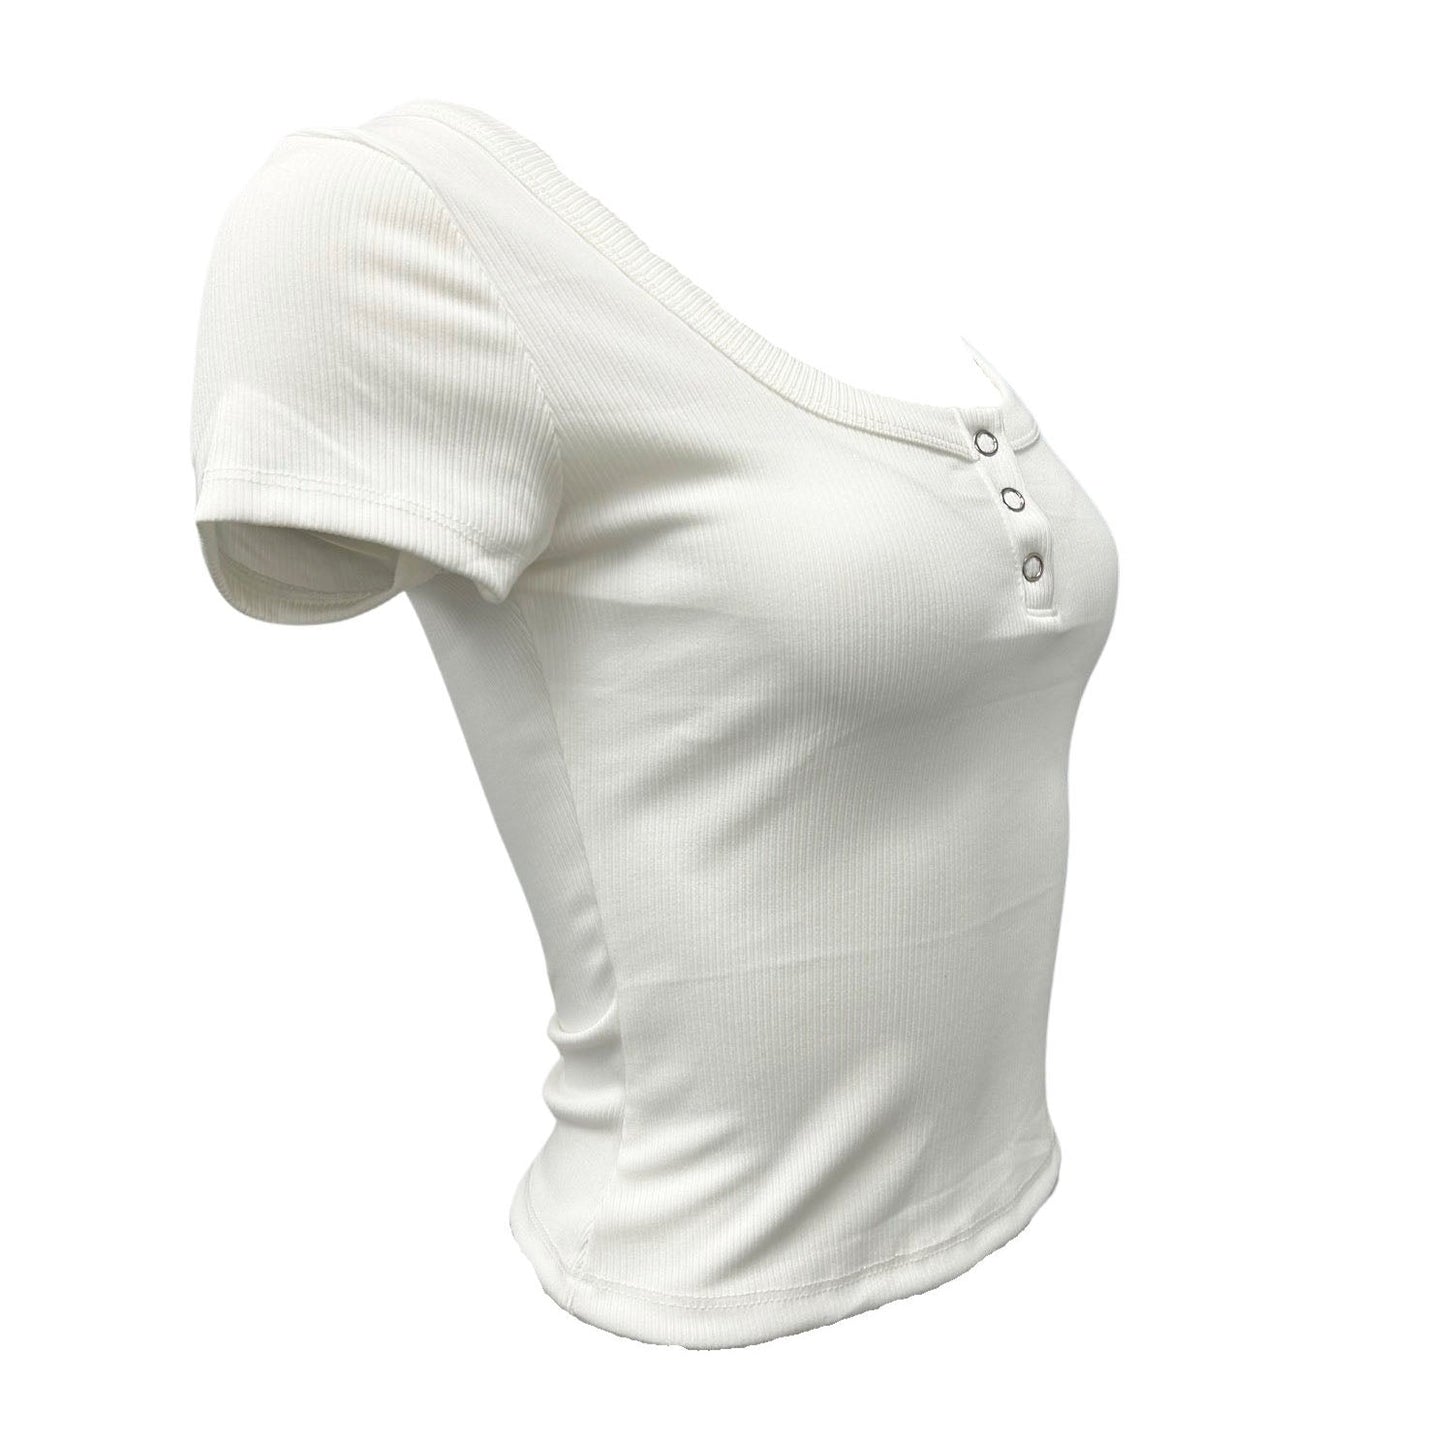 Perfect Tee 3 Snap Scoop Neck Ribbed Top - Ivory